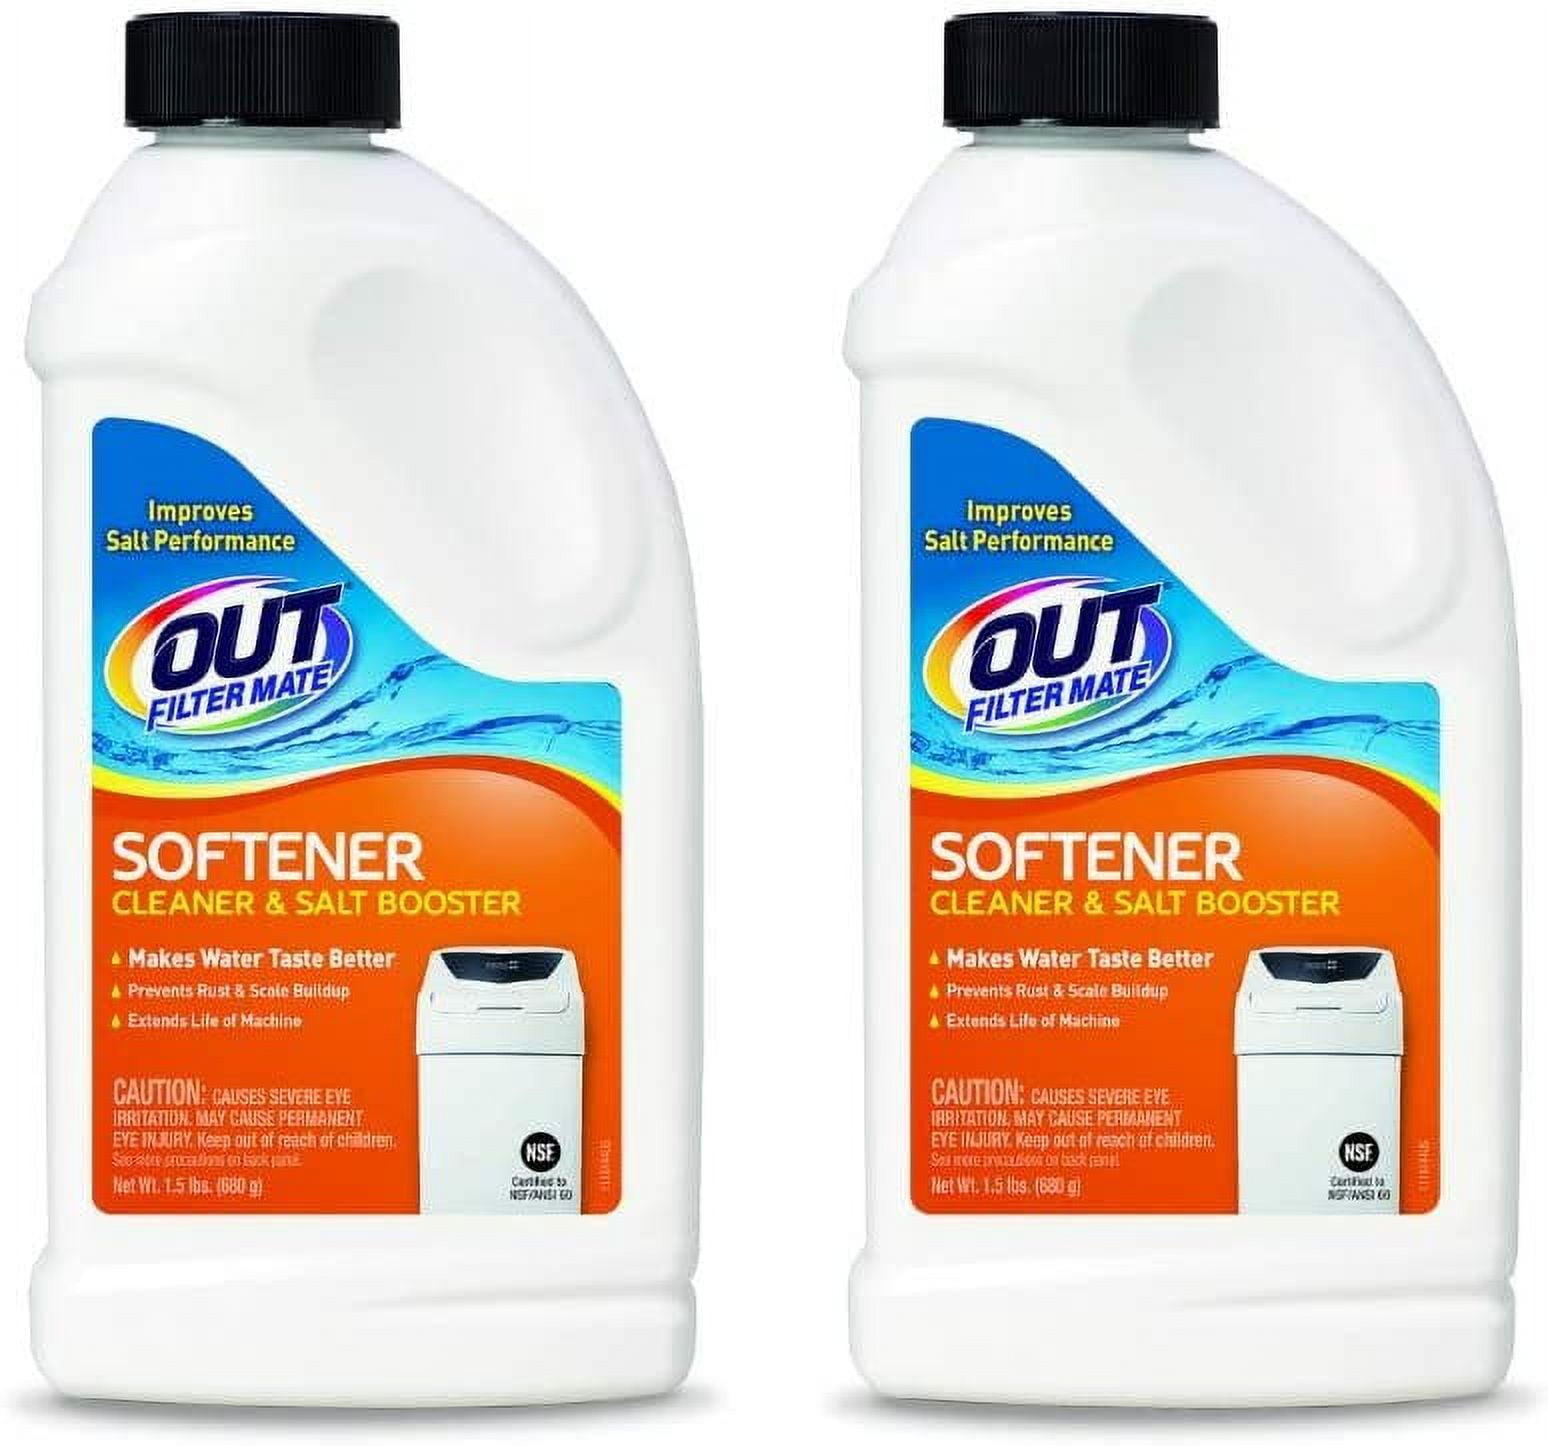 Out Filter Mate Water Softener Cleaner and Salt Booster Powder, 24 oz Bottle 2-Pack